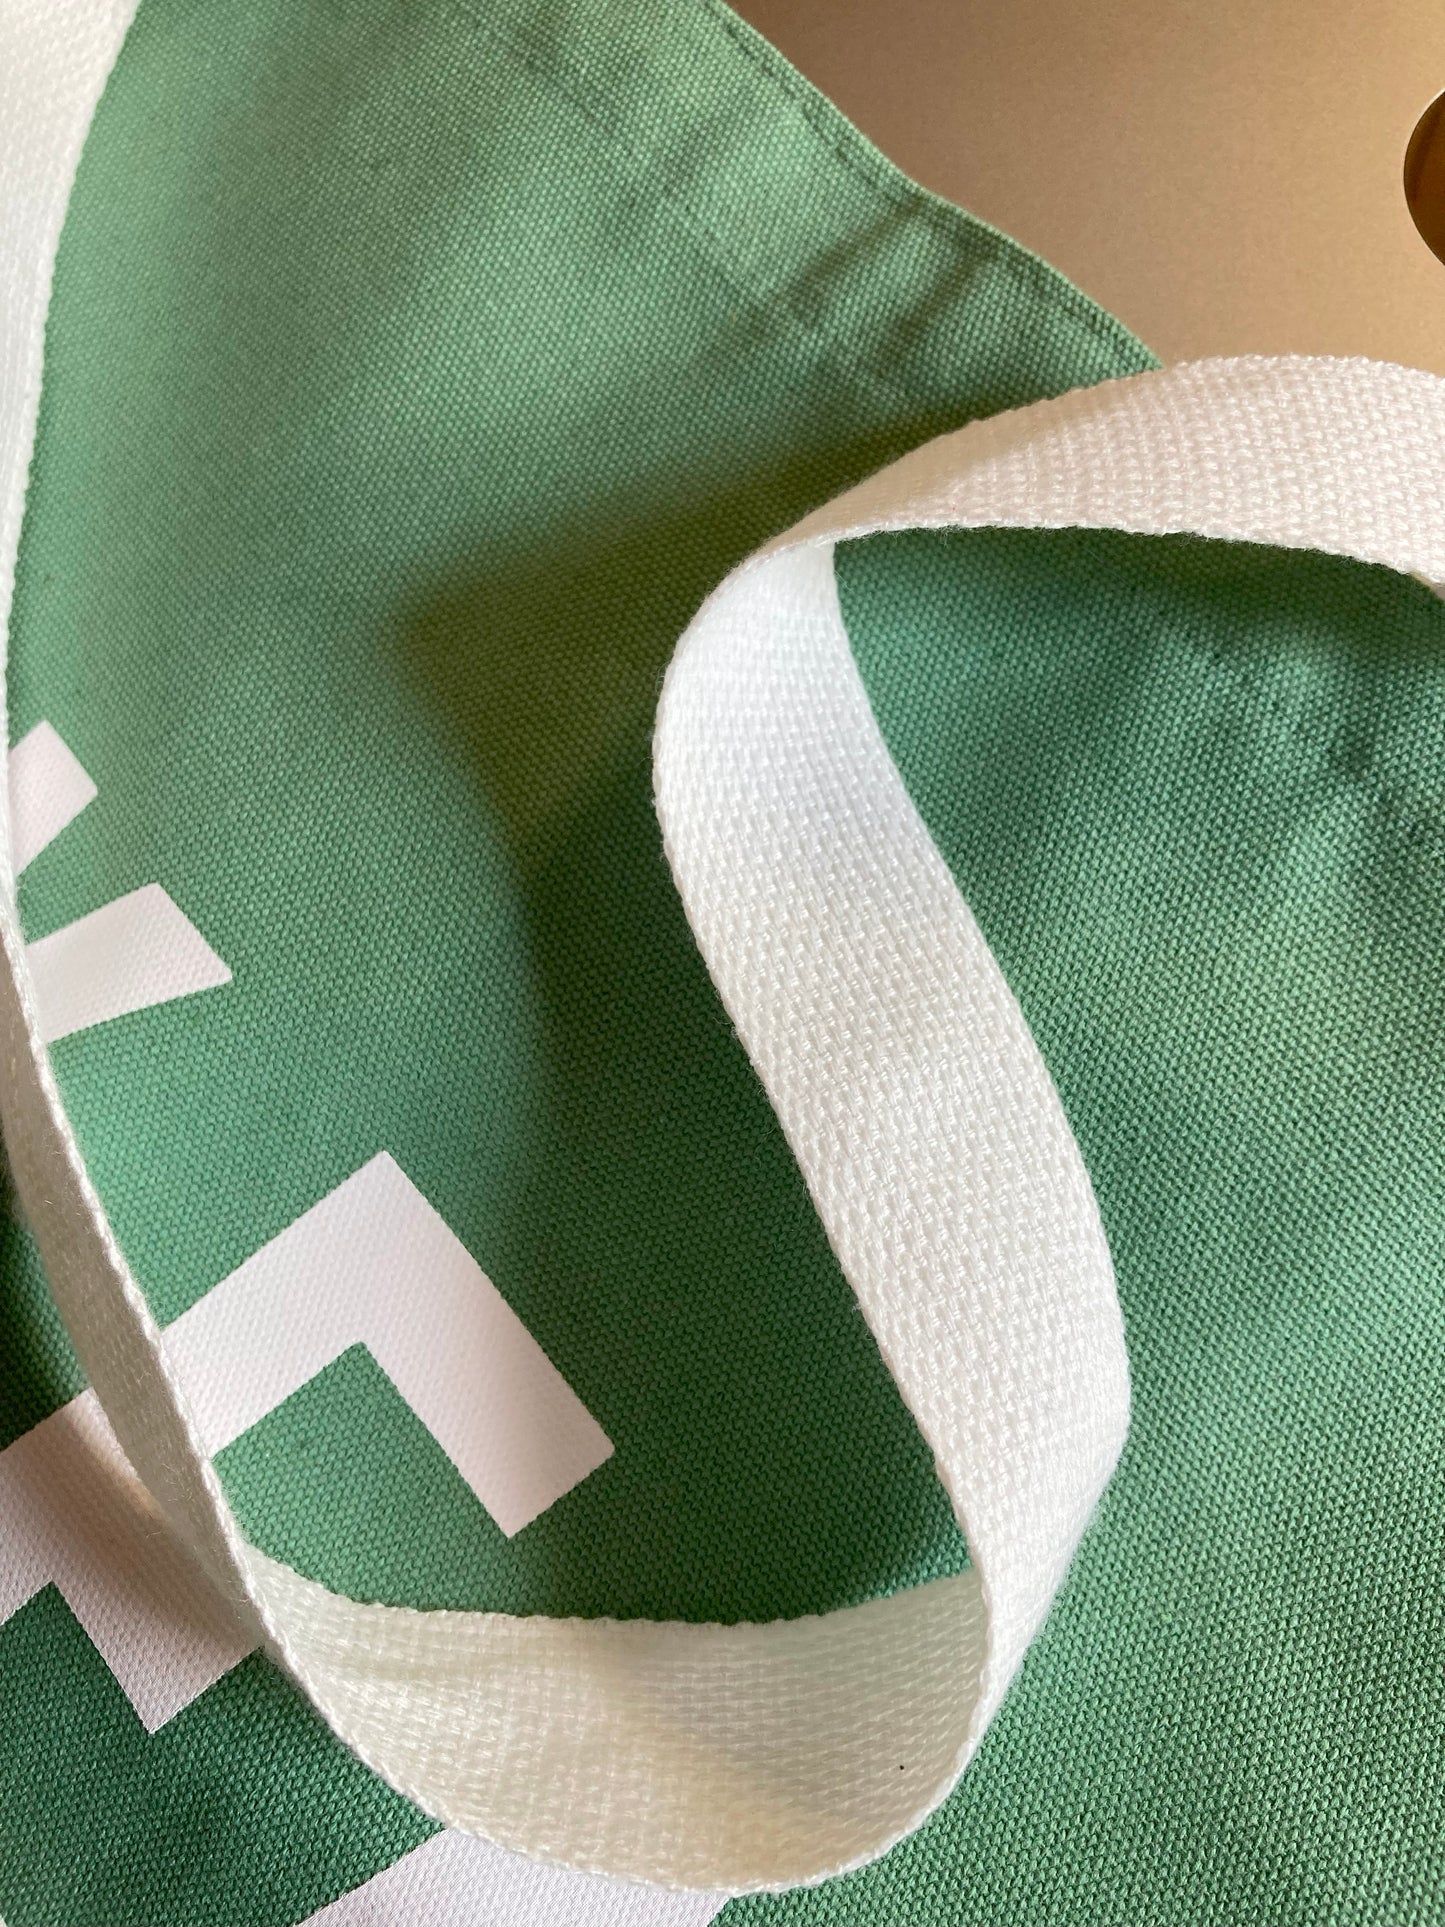 Extra Large Weekend Canvas Tote Bag - Pistachio Green (FREE SHIPPING)